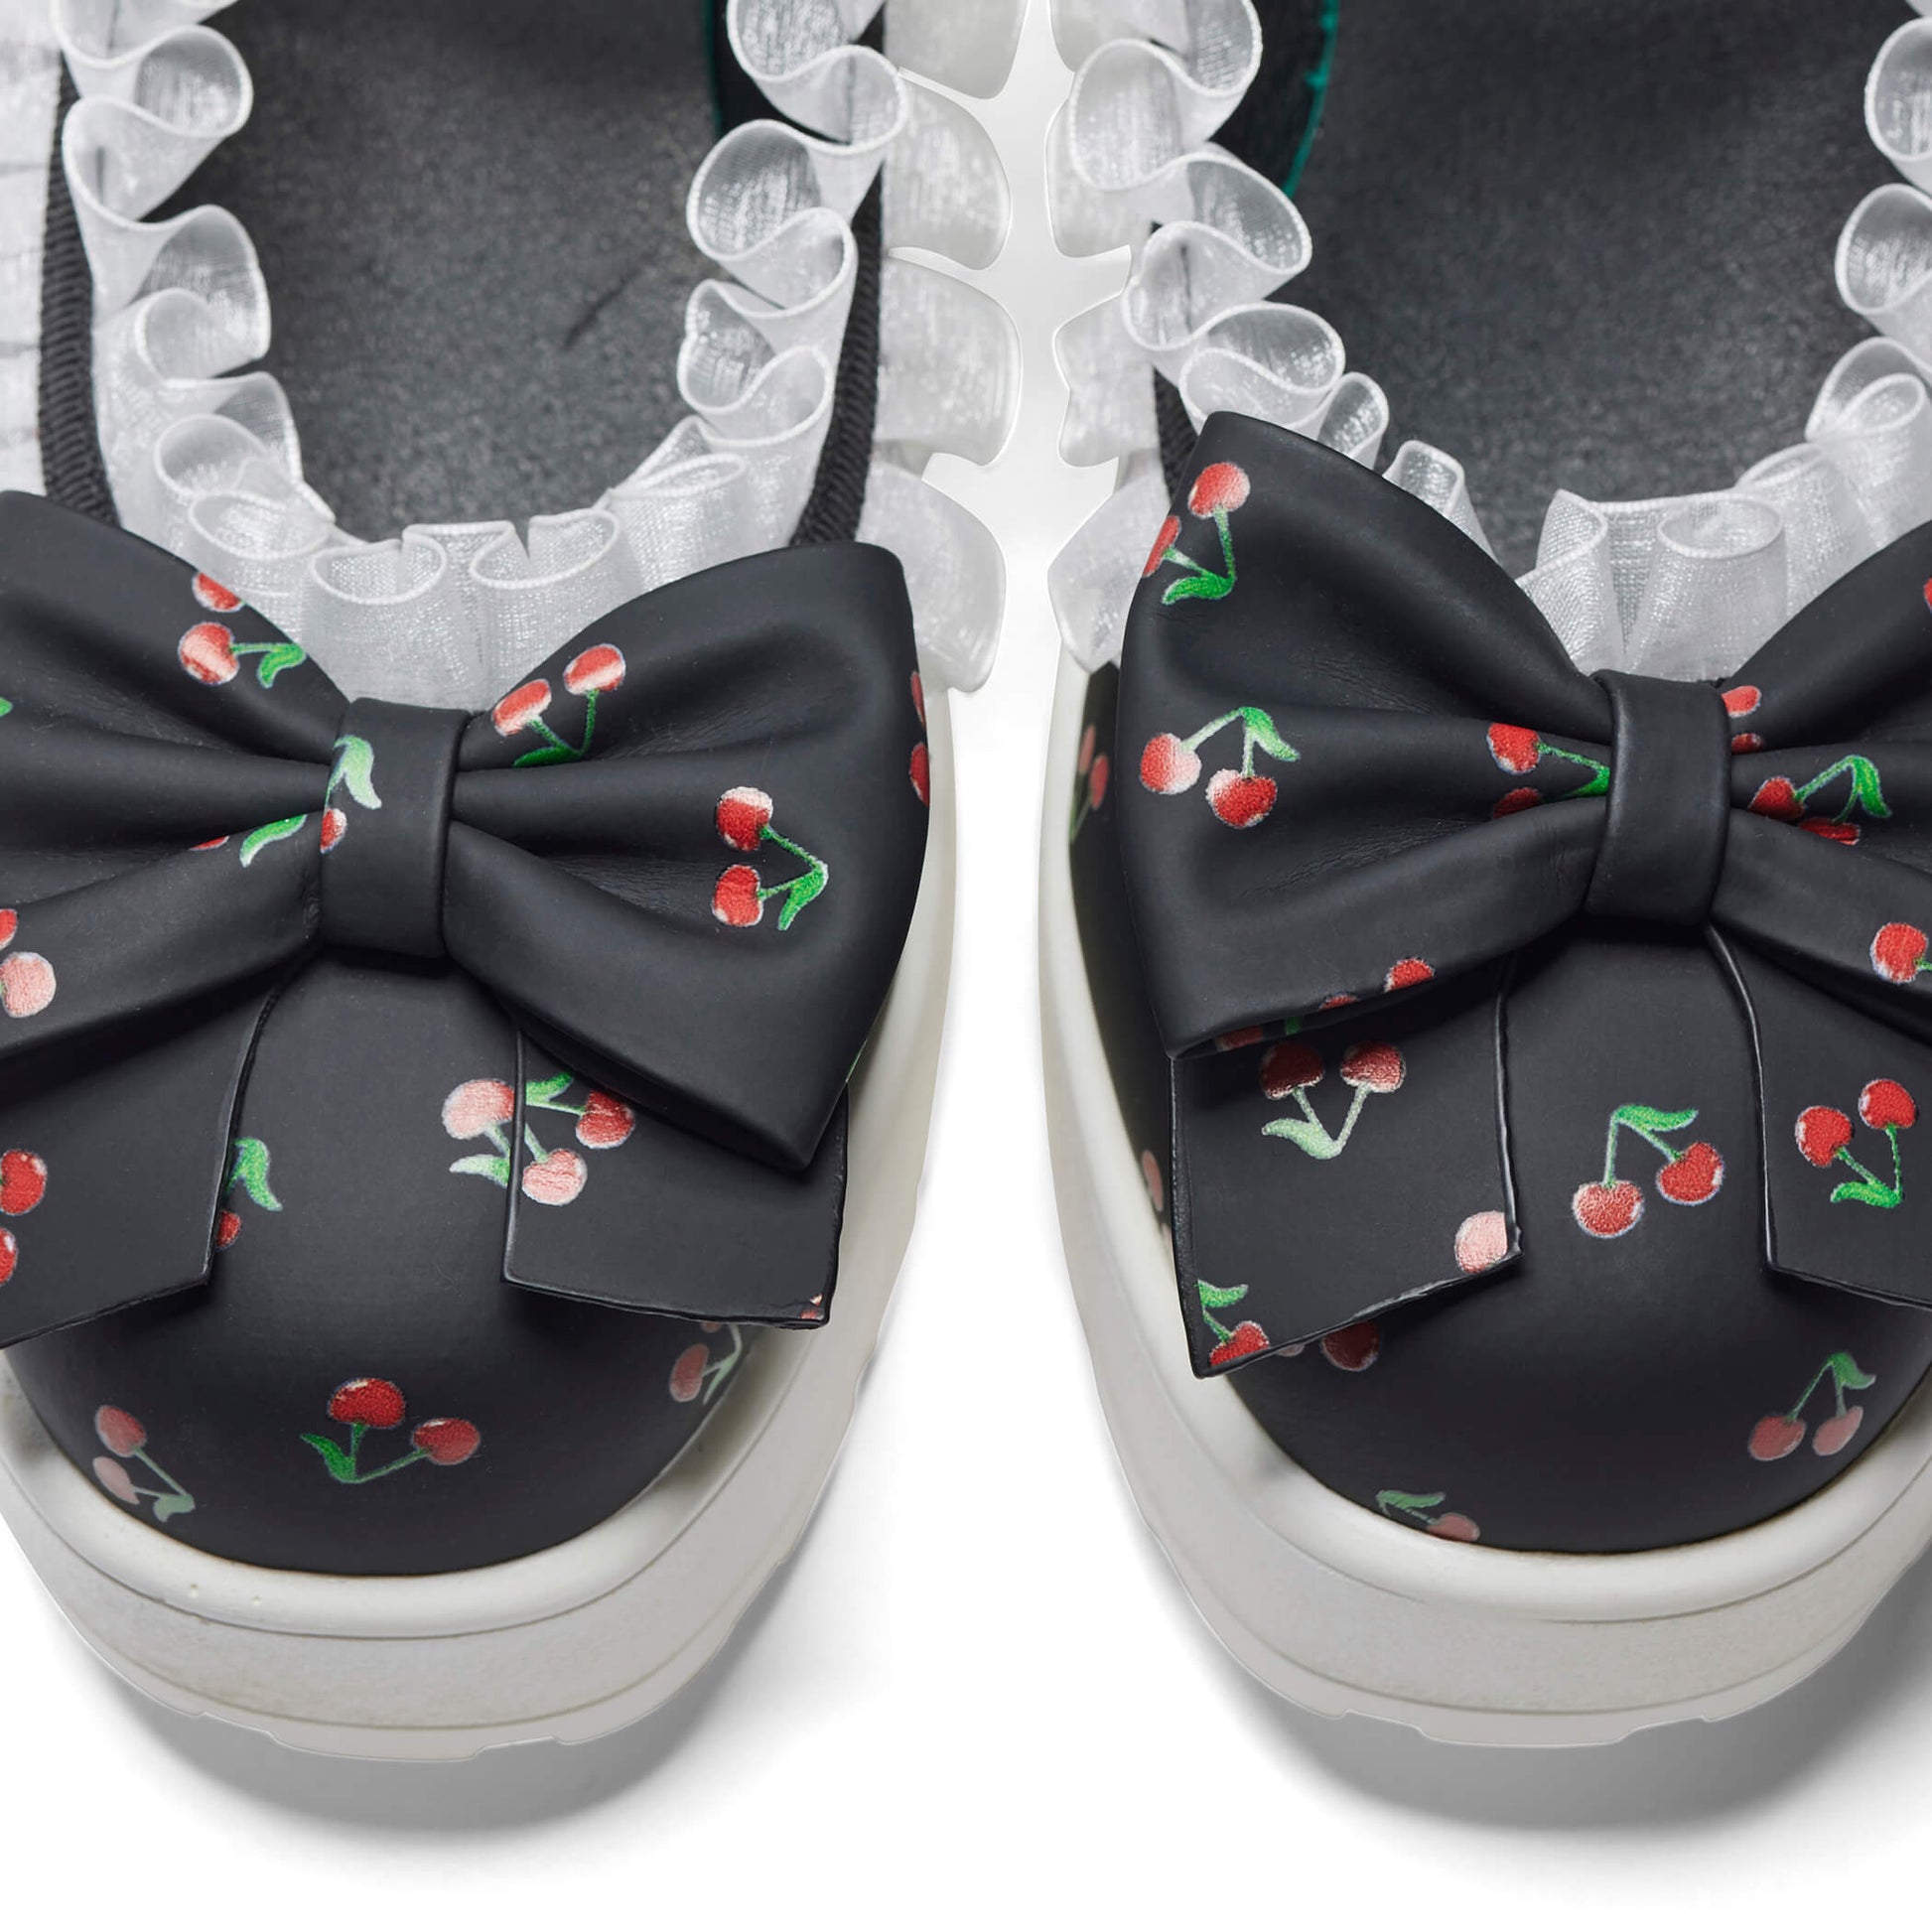 Tira Mary Janes Shoes 'Black Cherry Bakewell Edition' - Mary Janes - KOI Footwear - Black - Front Detail